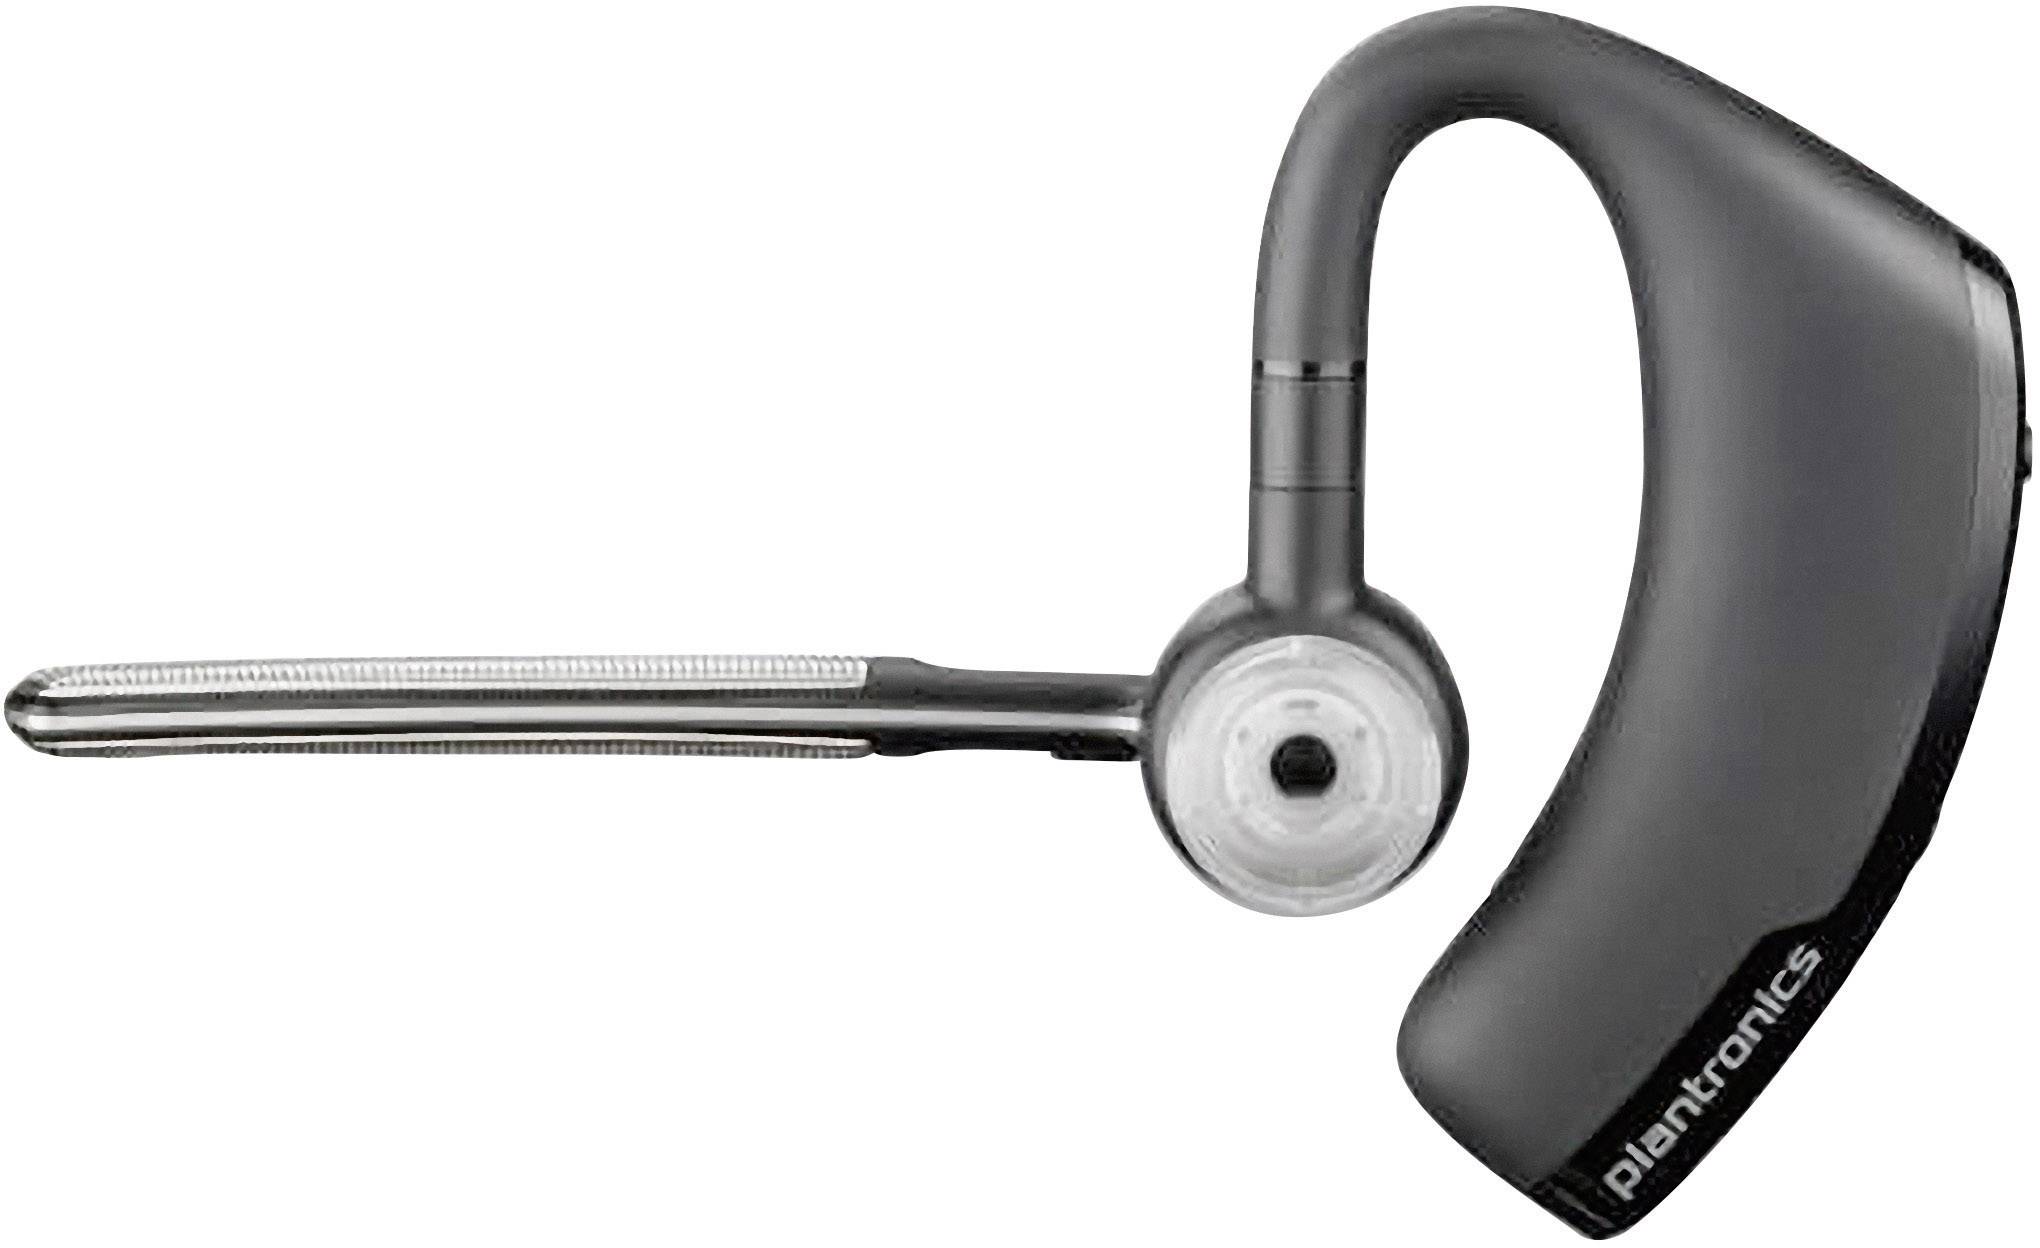 Plantronics Voyager Mobile phone In-ear headset Bluetooth®